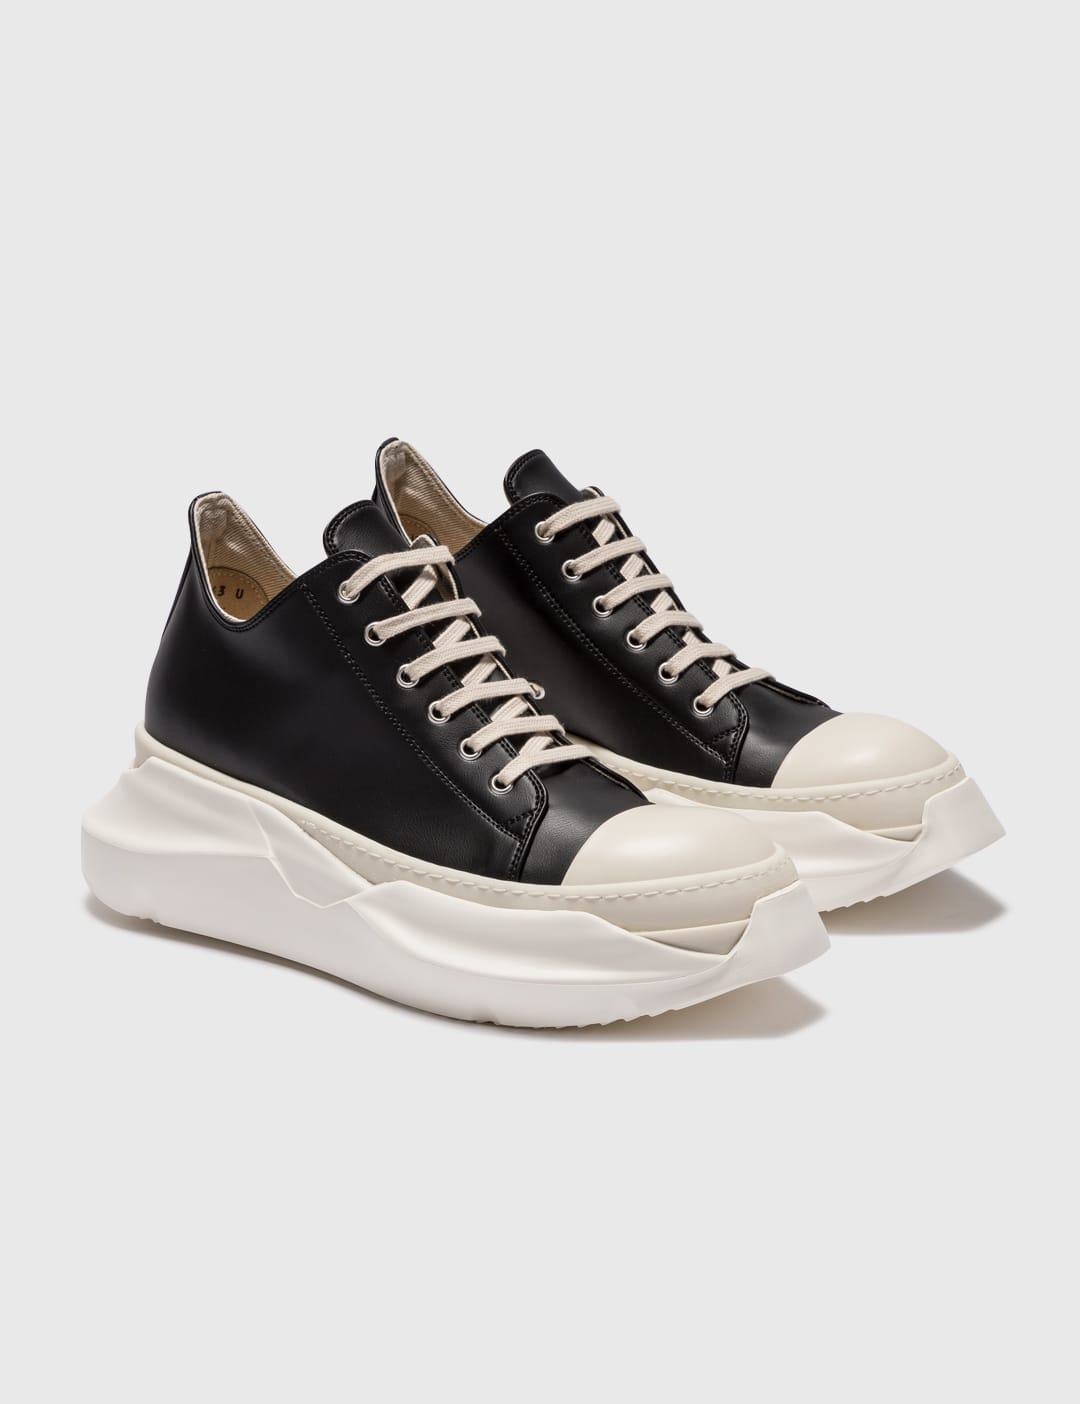 Rick Owens Drkshdw - Abstract Low Sneakers | HBX - Globally ...